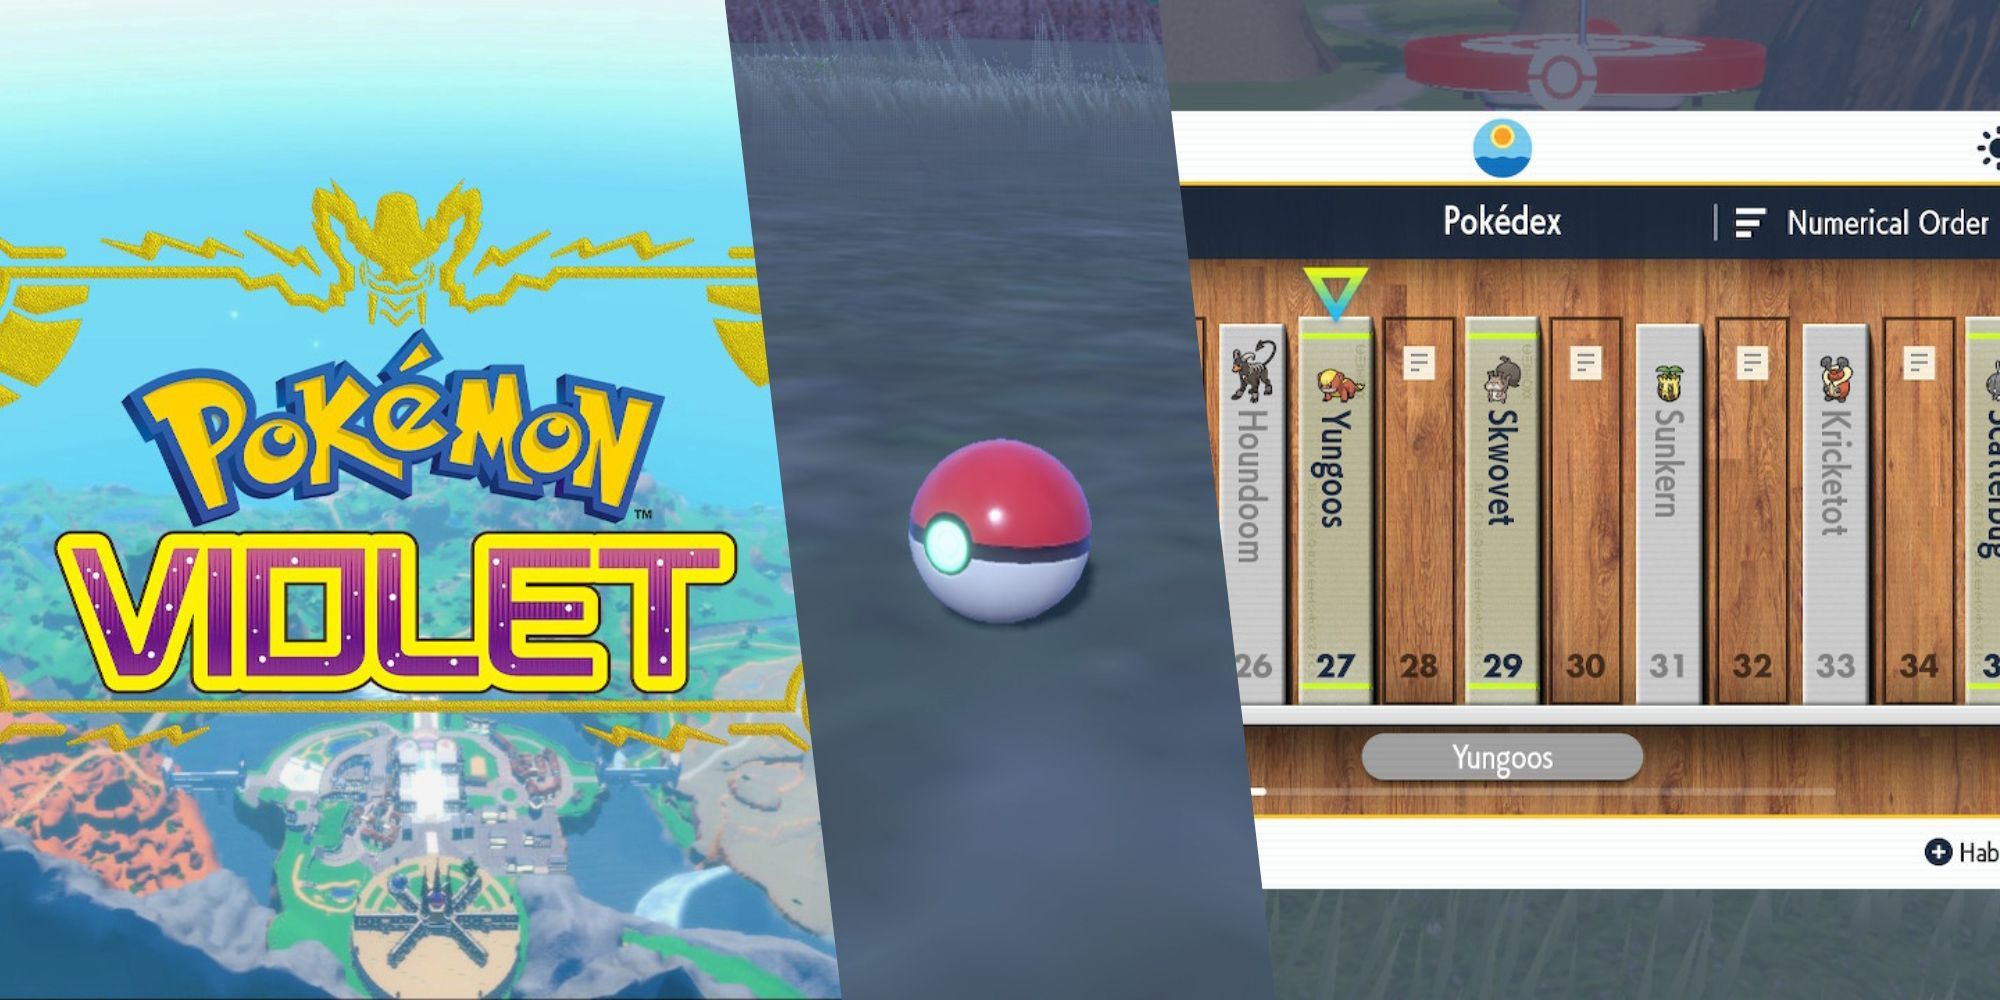 The Missing Pokemon in Scarlet and Violet's Pokedex Shows Dexit Was For  Nothing - GameRevolution